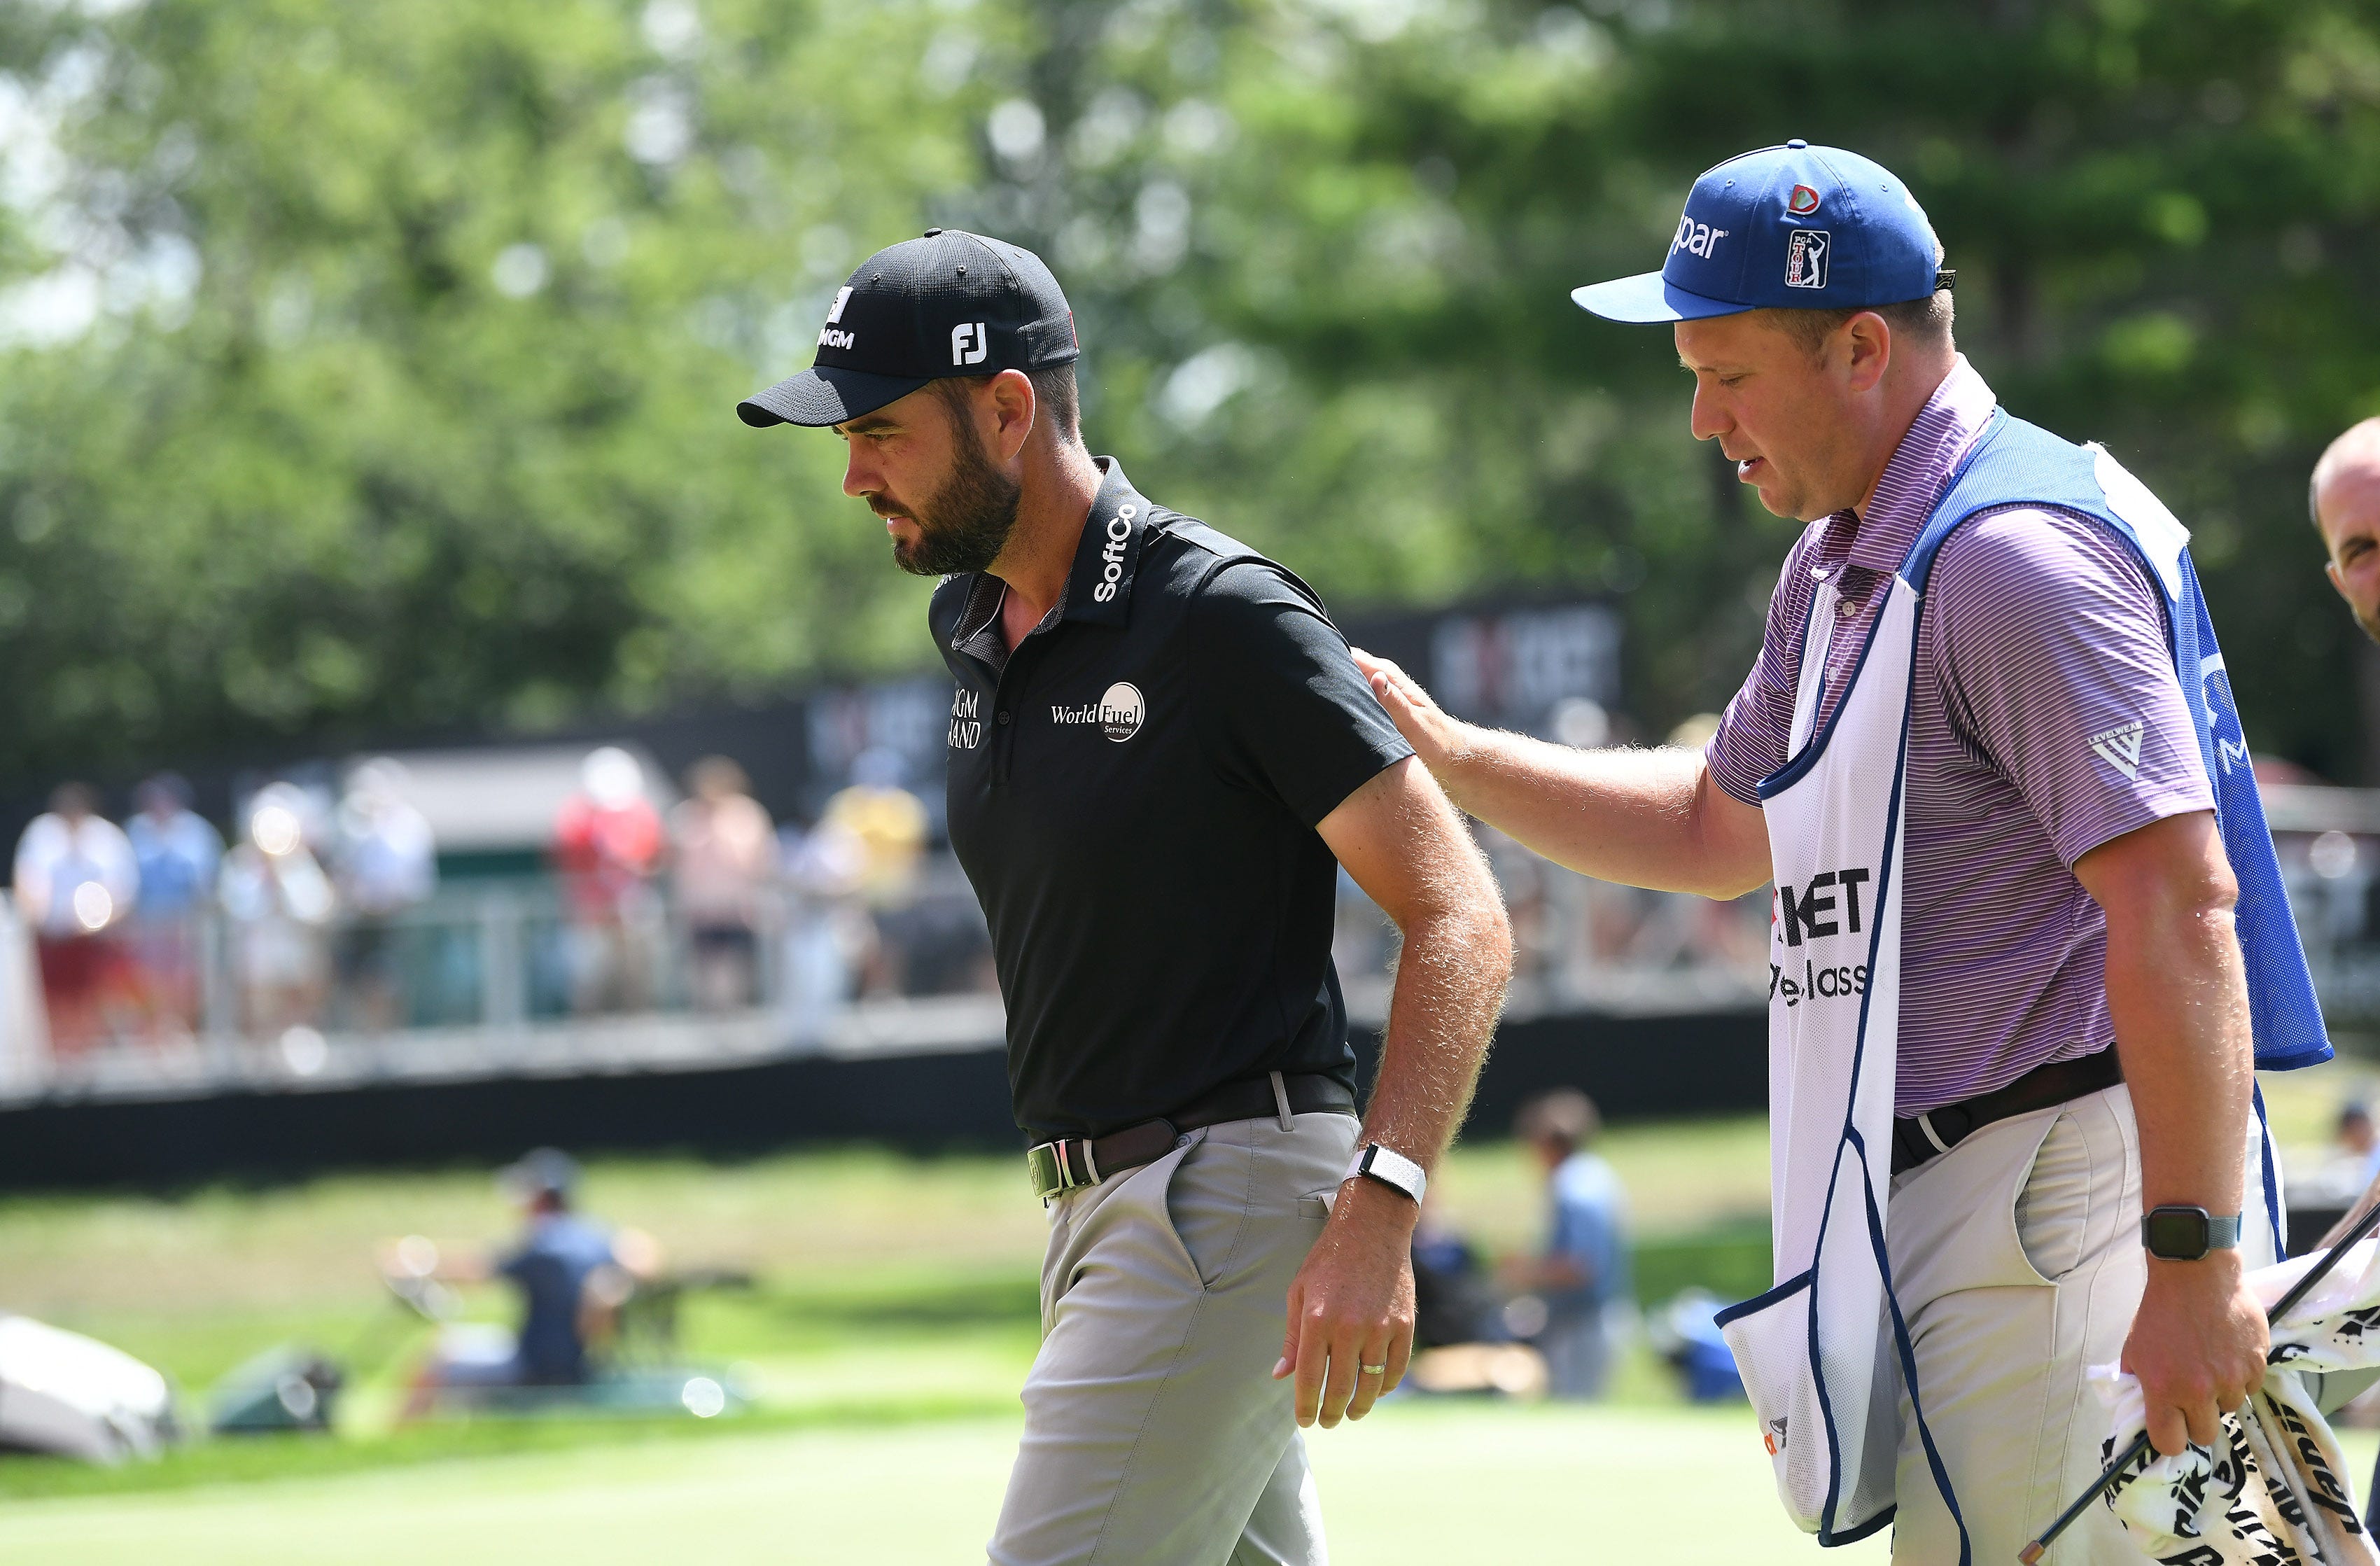 Troy Merritt gets a pat on the back from his caddie after finishing Round 2.